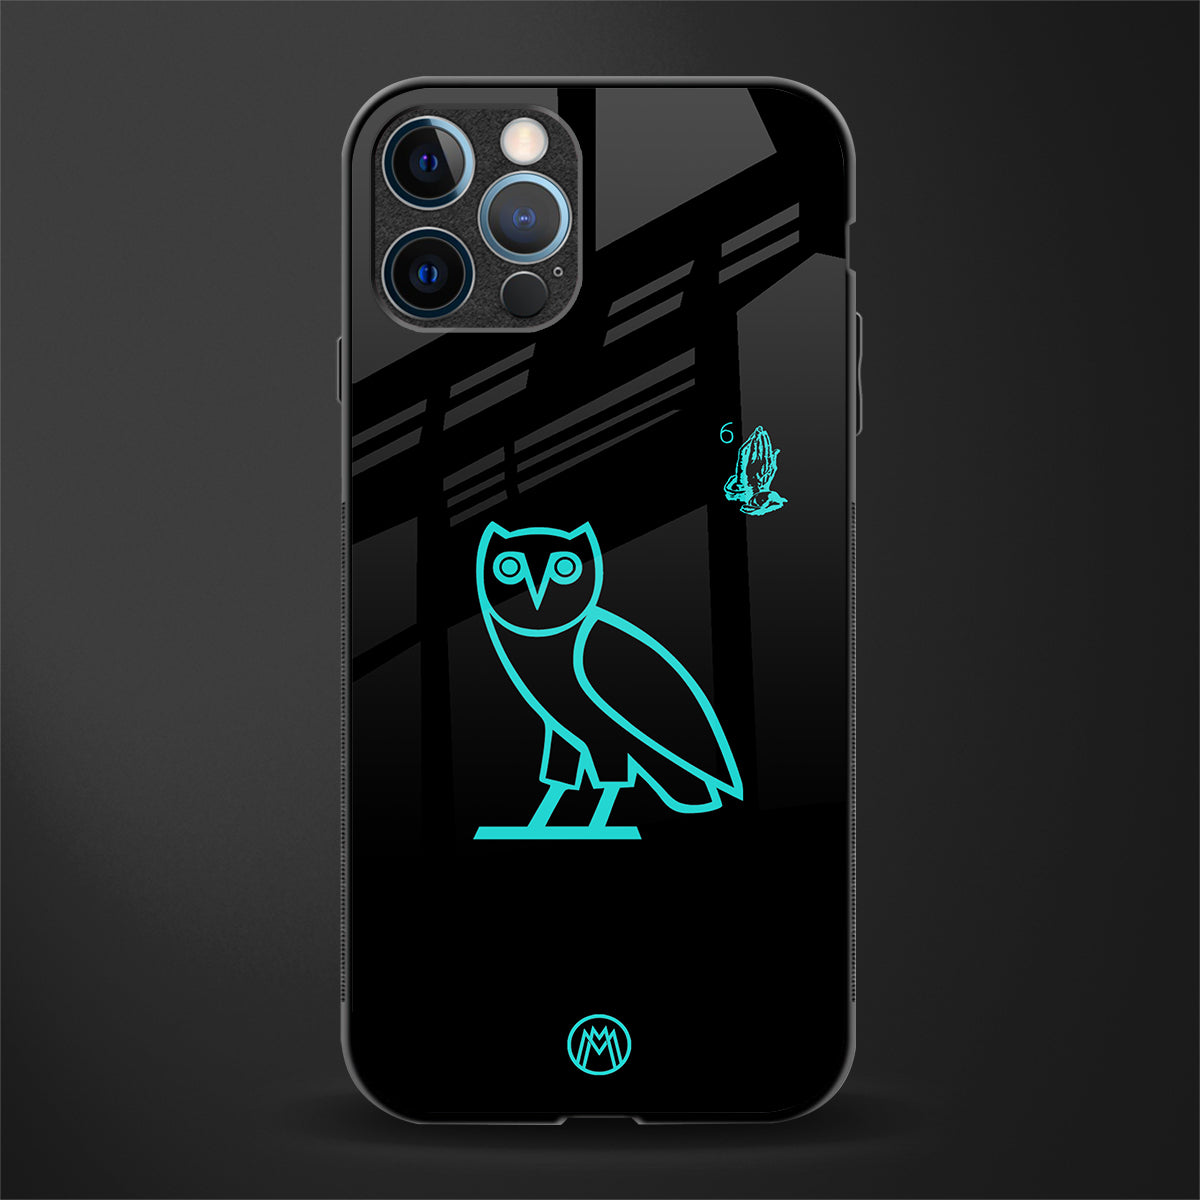 ovo glass case for iphone 12 pro max image